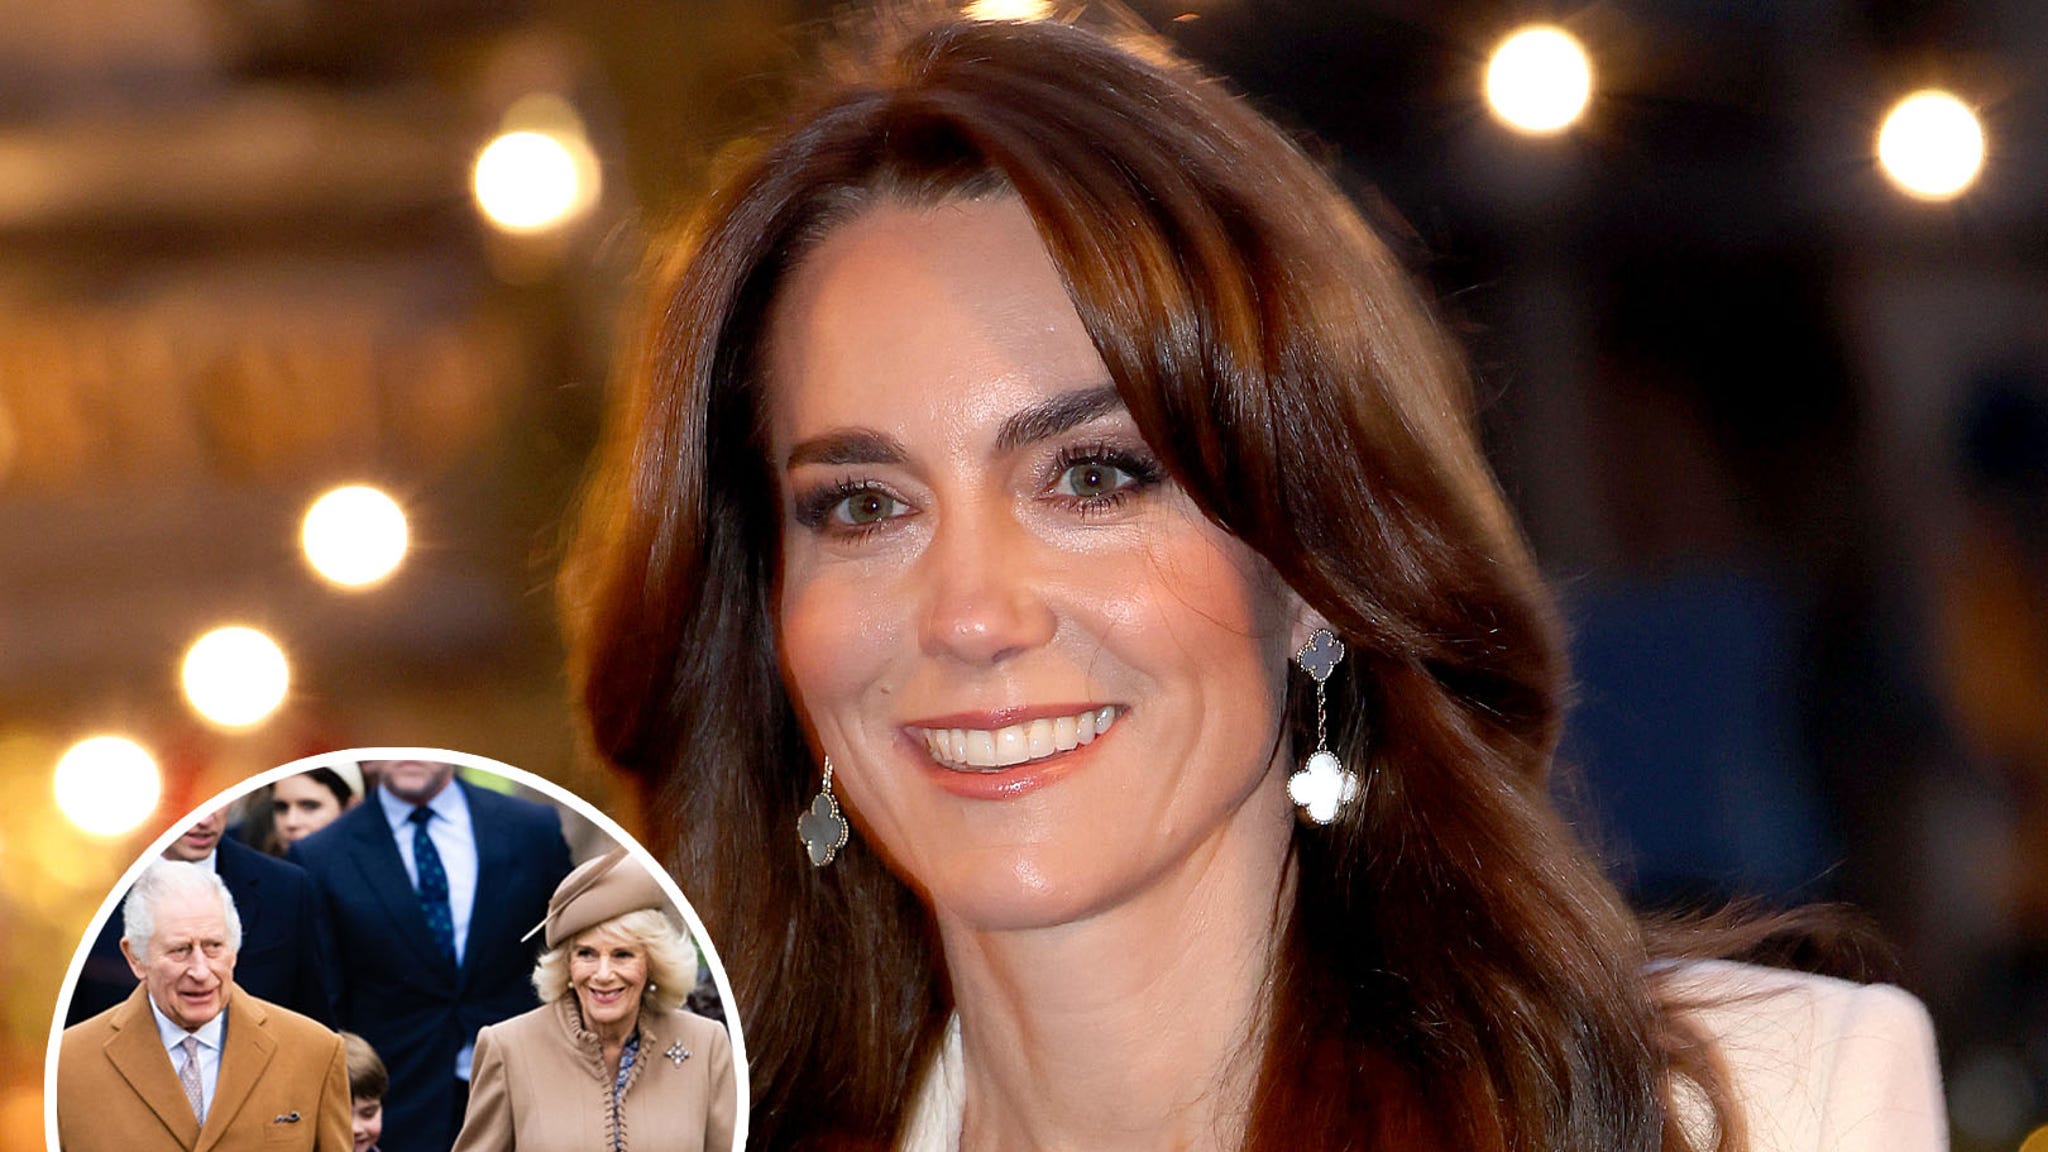 King Charles And Queen Camilla Wish Kate Middleton A Happy Birthday ...